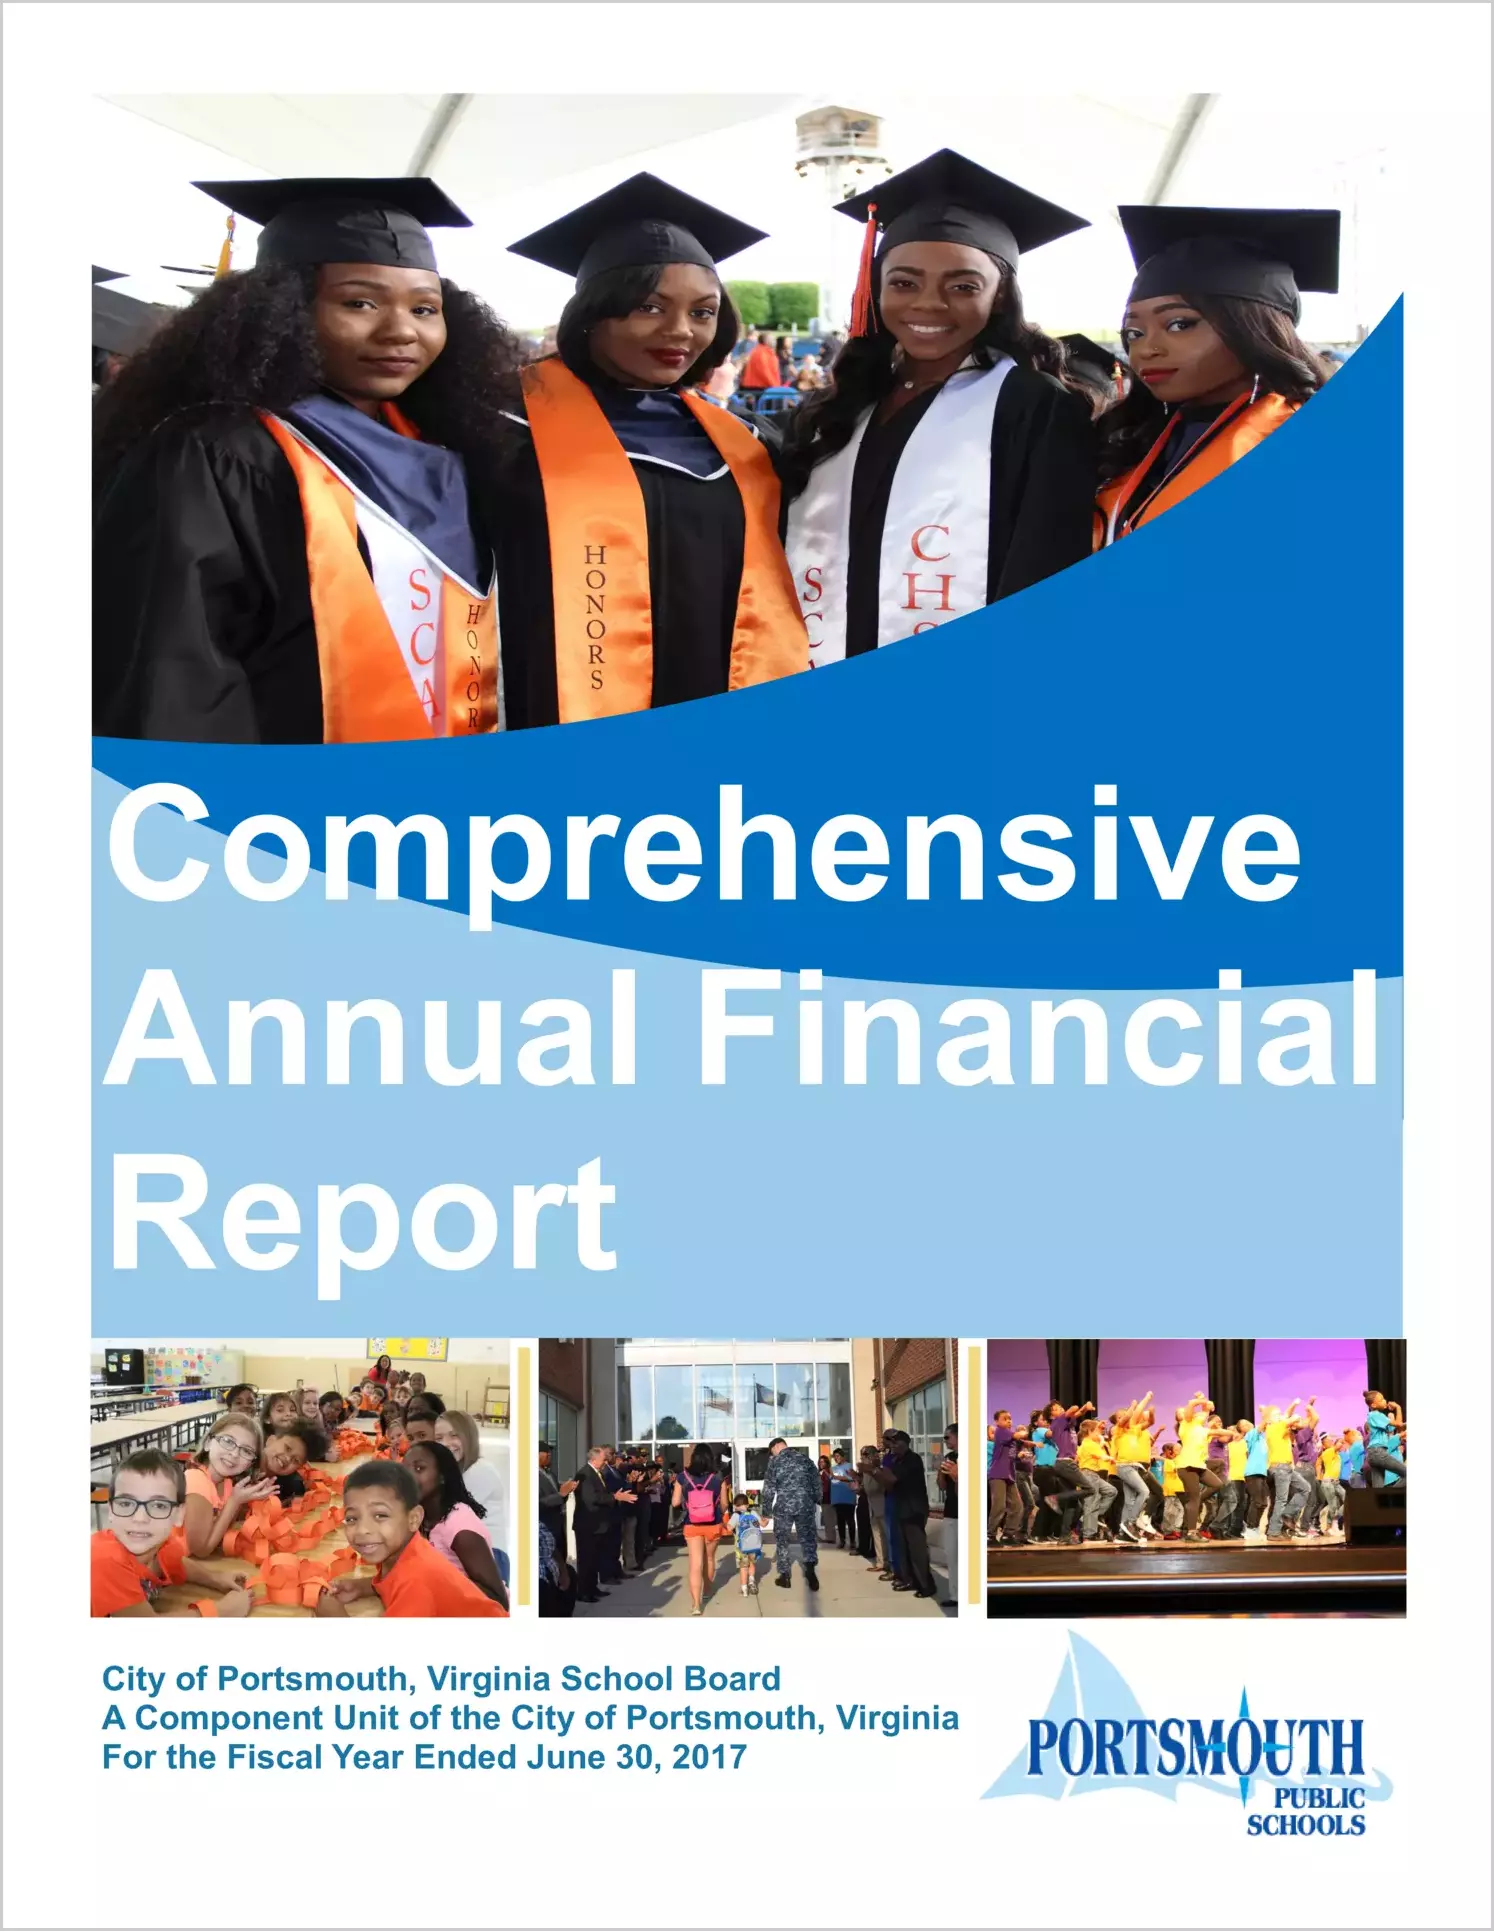 2017 Public Schools Annual Financial Report for City of Portsmouth